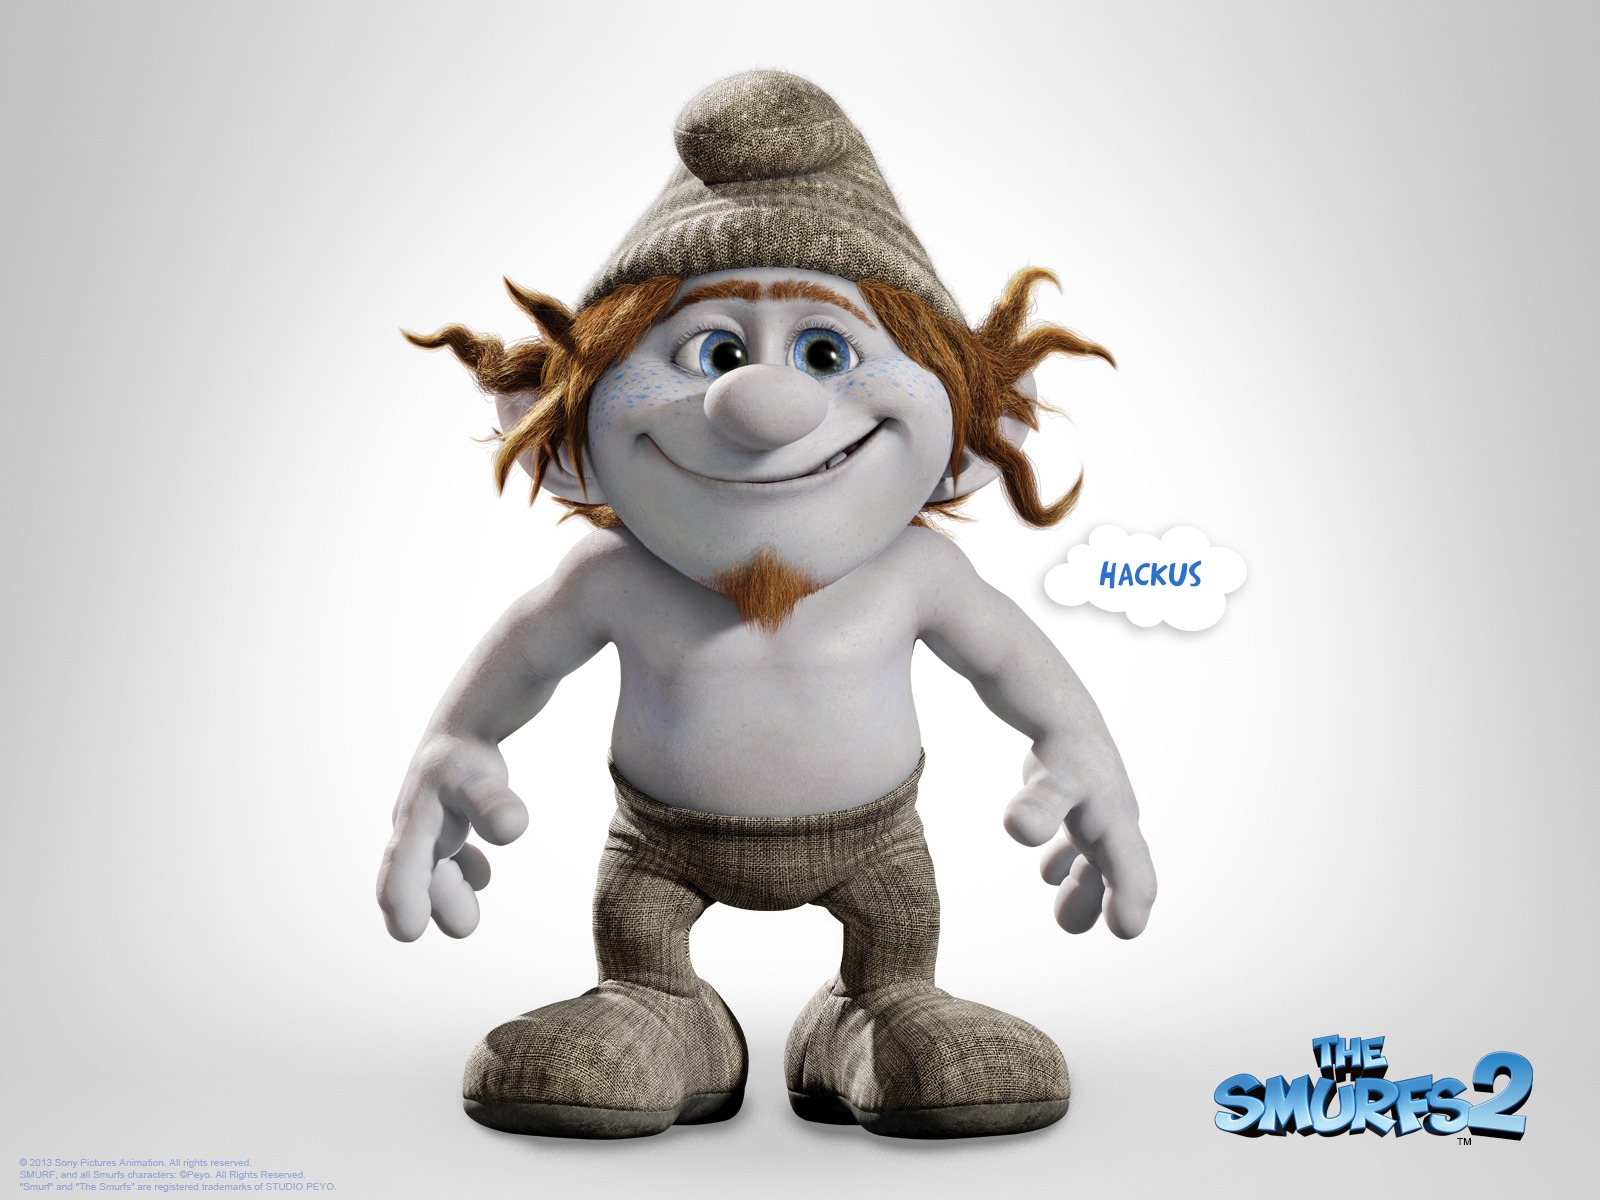 Hachus The Smurfs 2 for 1600 x 1200 resolution